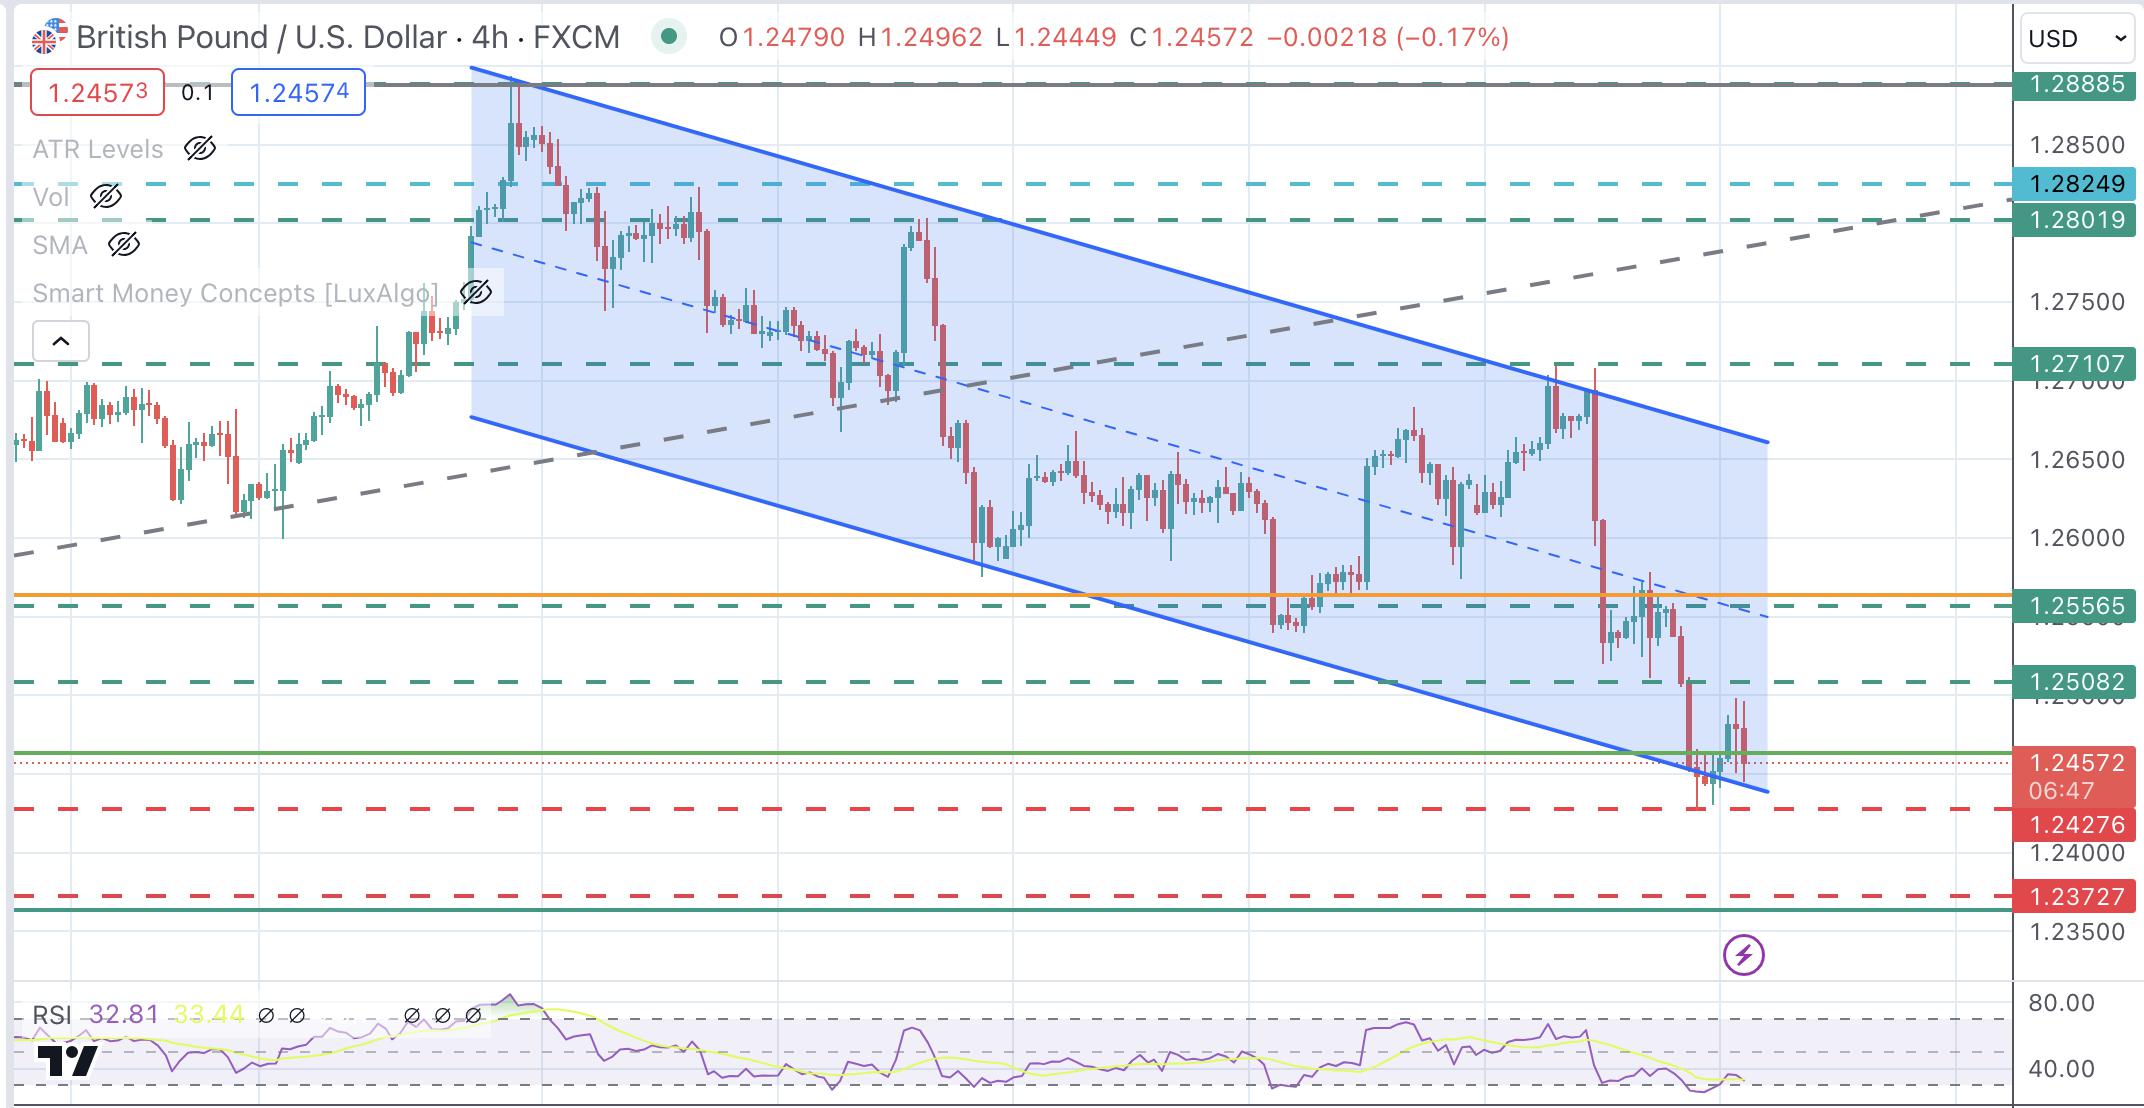 GBP/USD Price Analysis: Pound, rejected at 1.2500 pulls back to retest support area at 1.2430